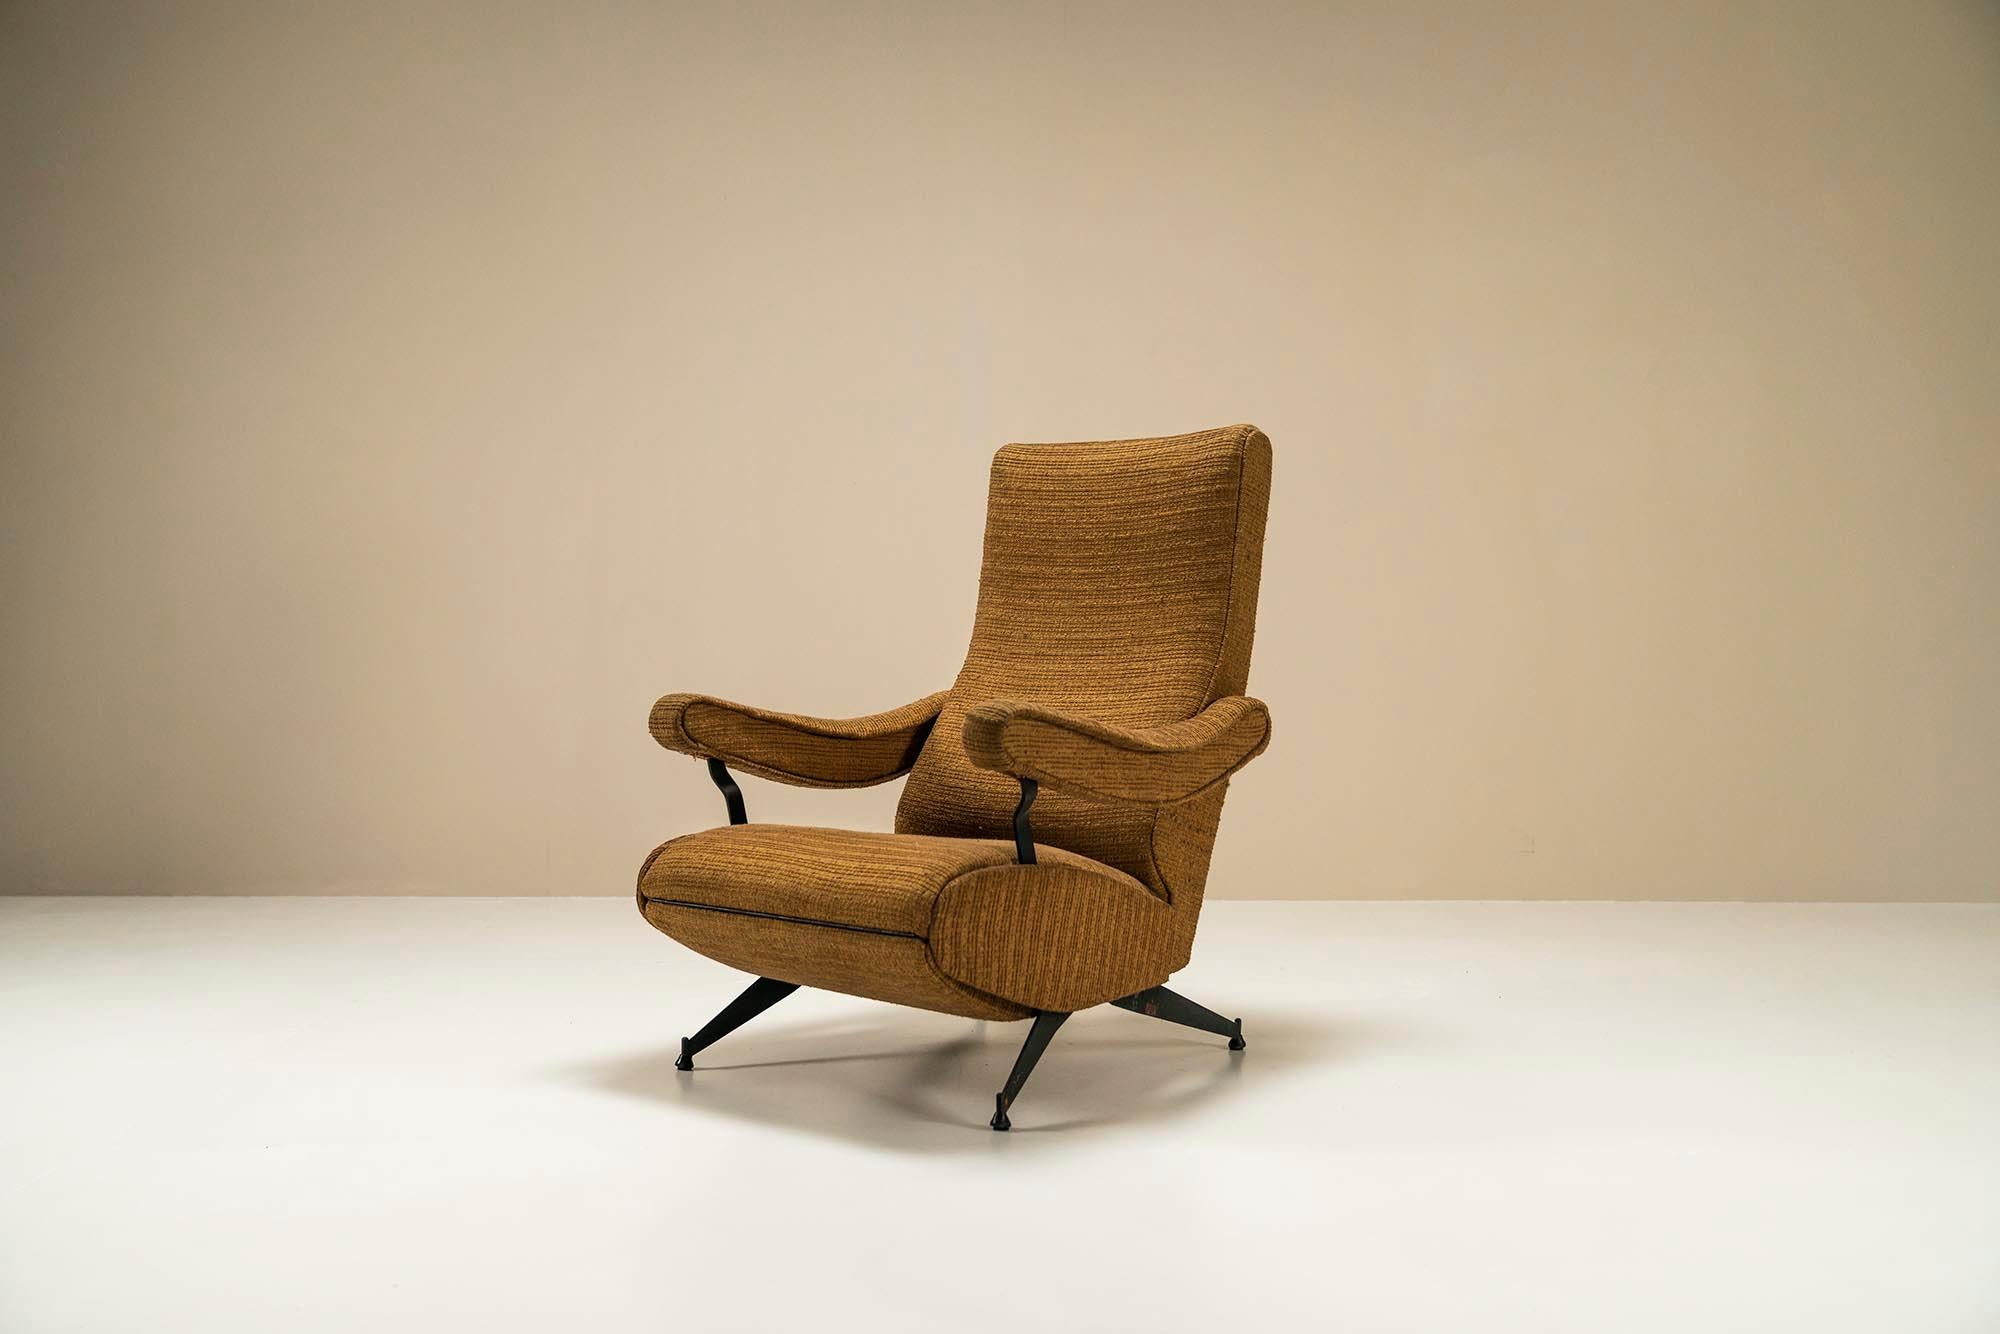 Reclining Armchair in Steel and Fabric by Nello Pini for Novarredo, Italy, 1959 In Fair Condition For Sale In Hellouw, NL